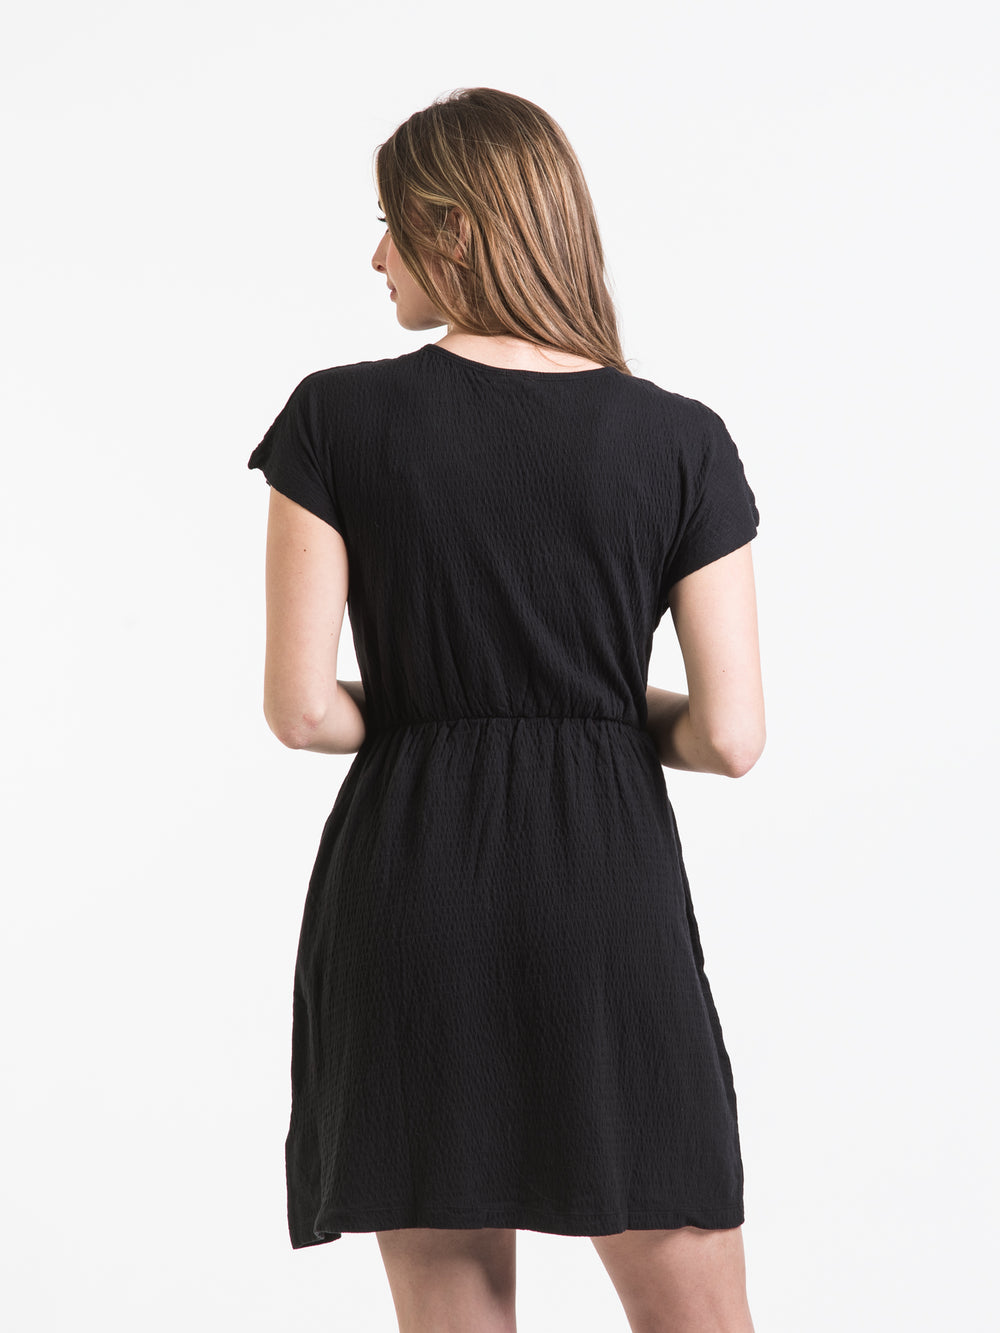 ROBE ROXY SIMPLE THOUGHTS - DÉSTOCKAGE